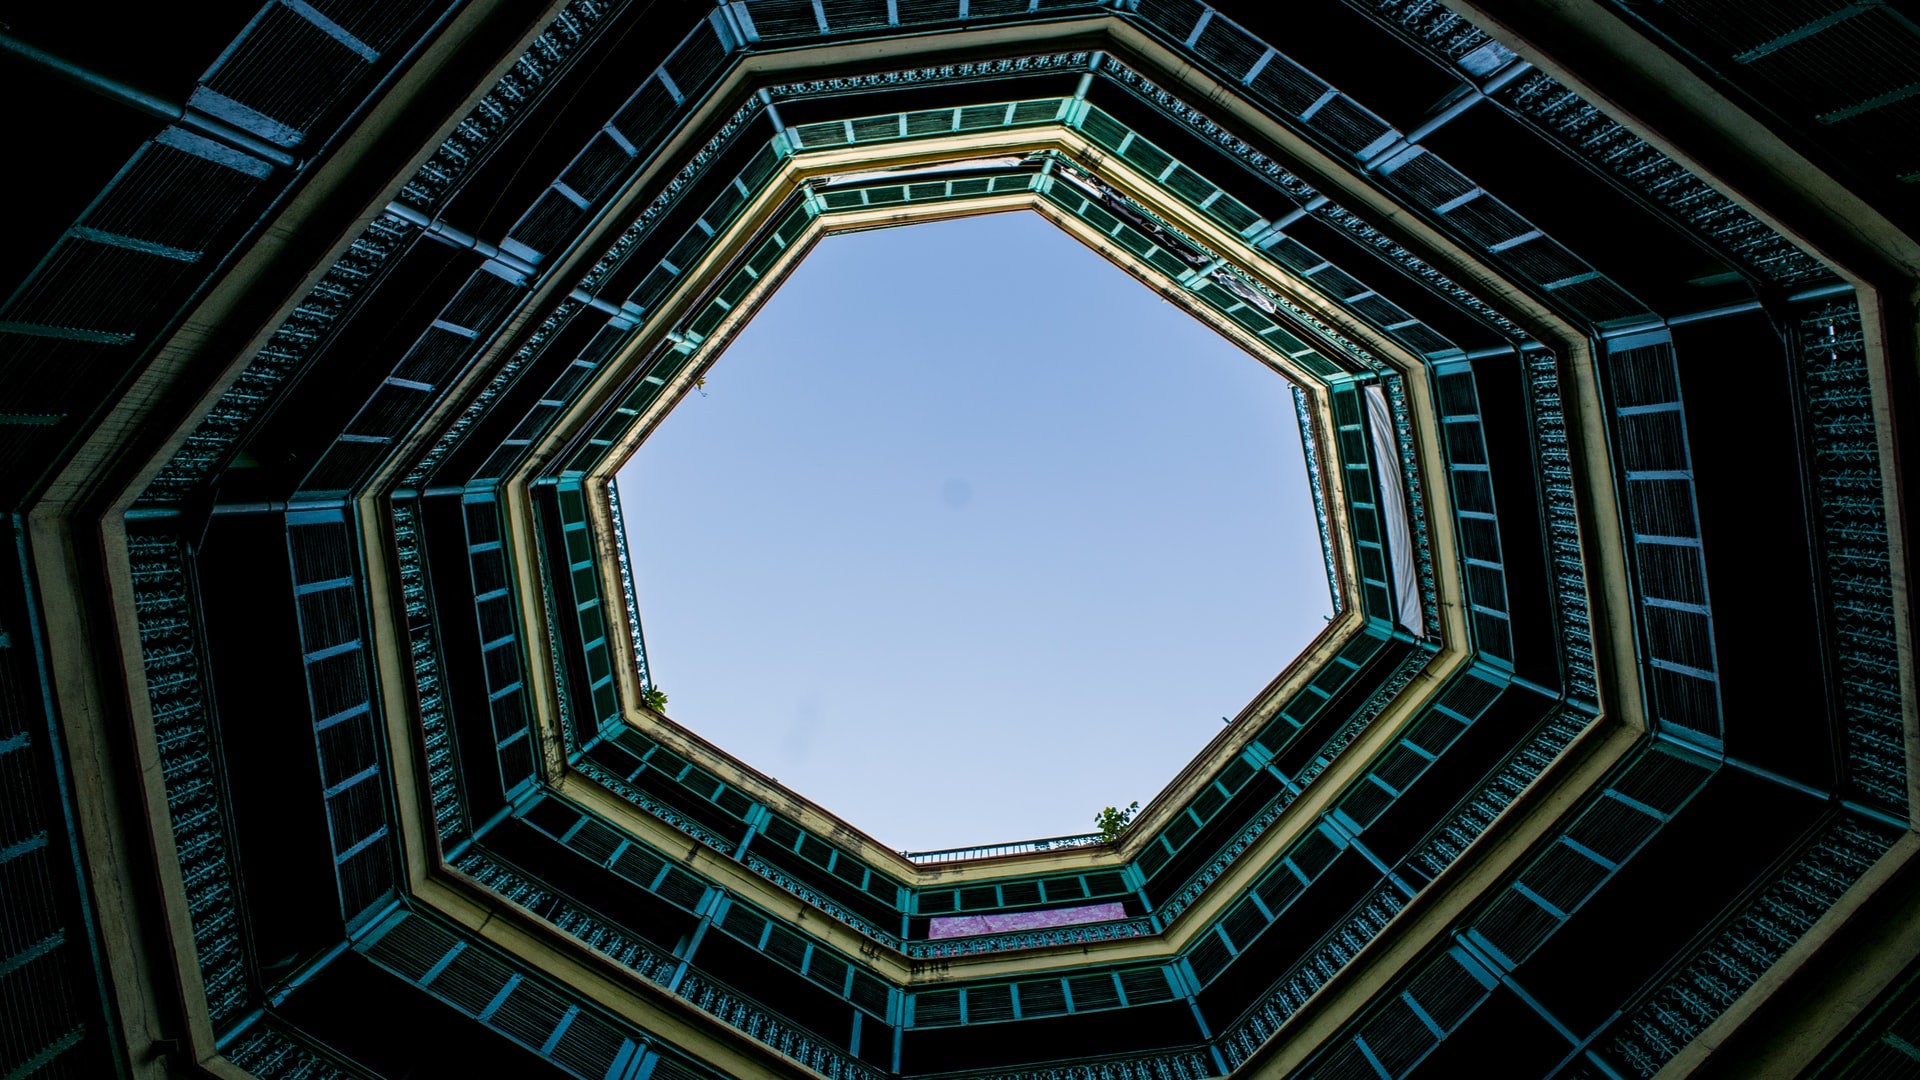 Looking up at the sky from within a hexagonal building